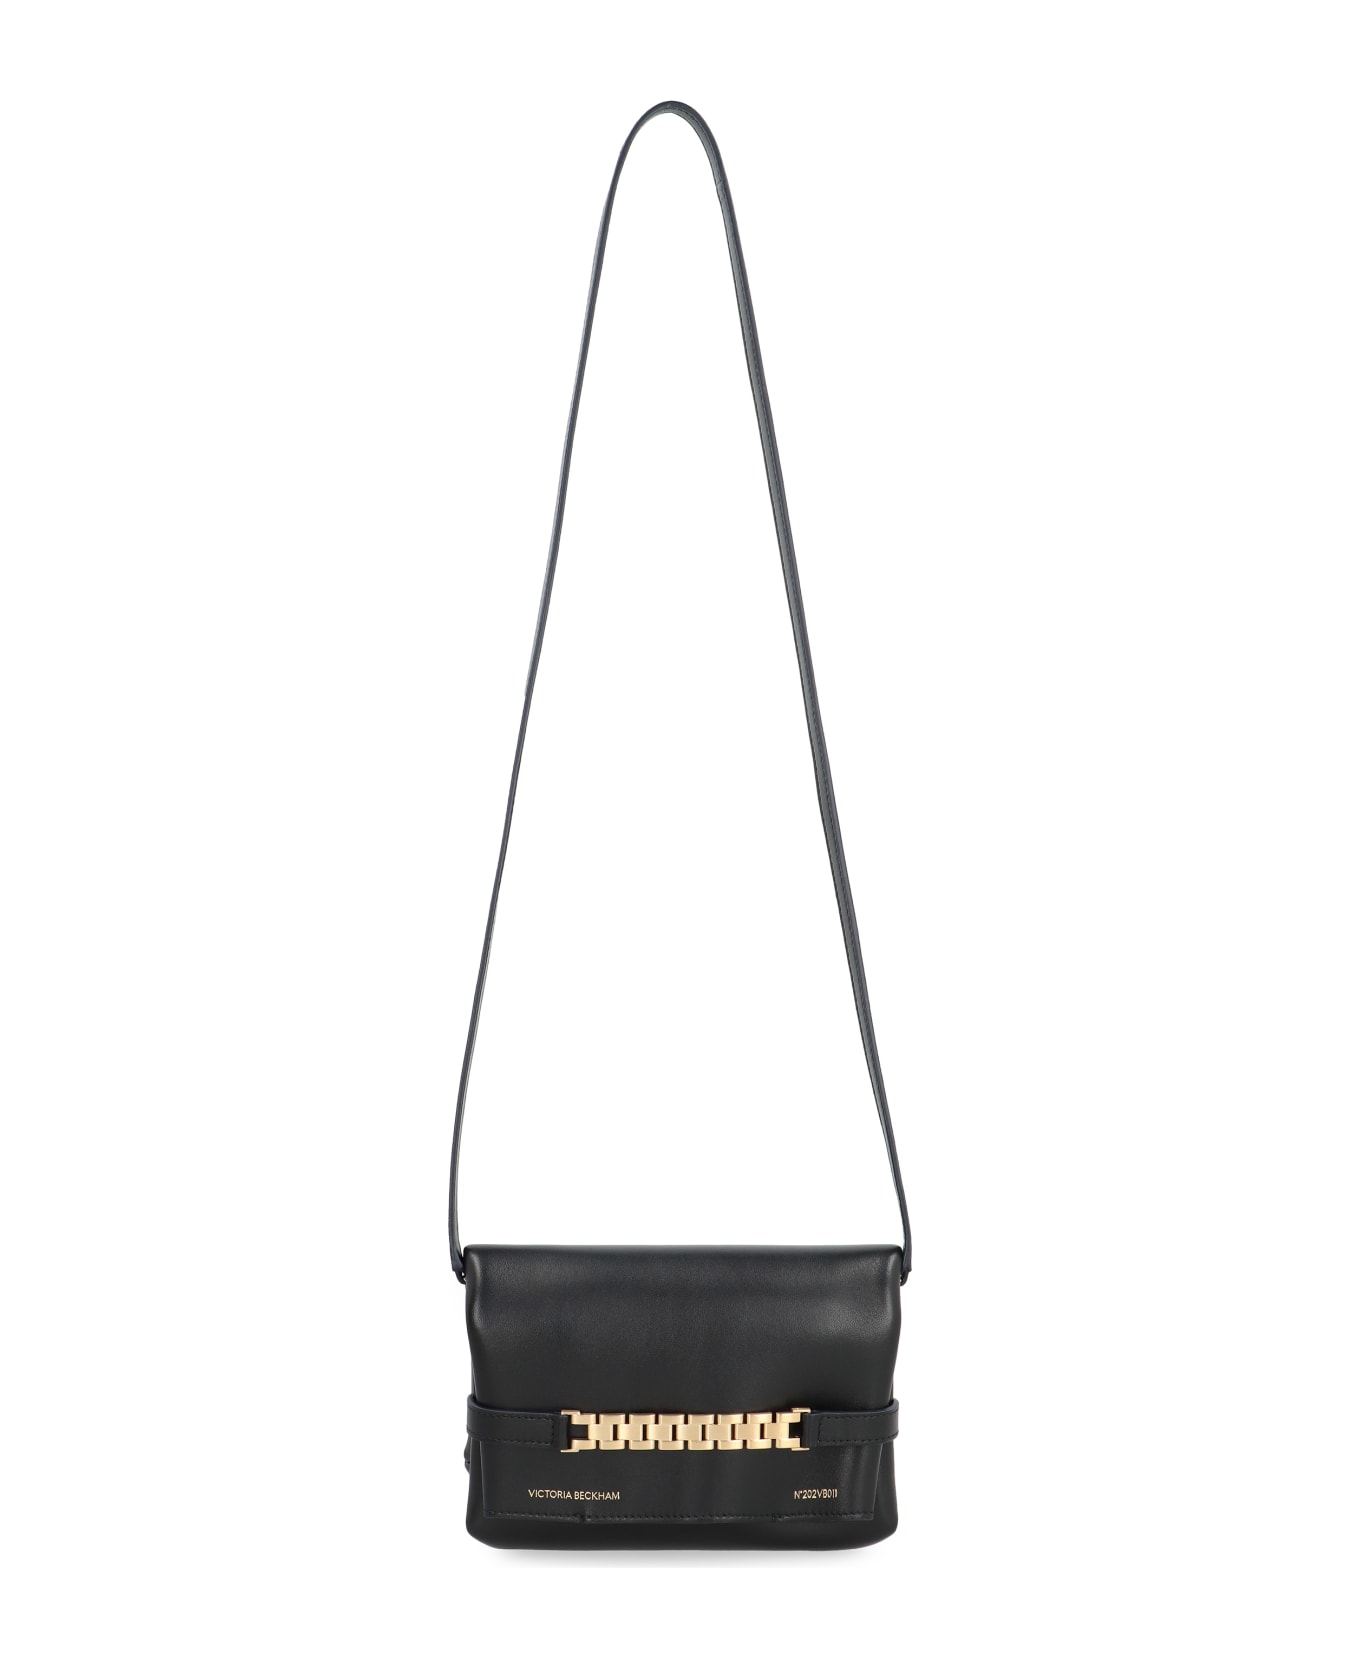 Victoria Beckham Leather Mini Pouch - BLACK クラッチバッグ